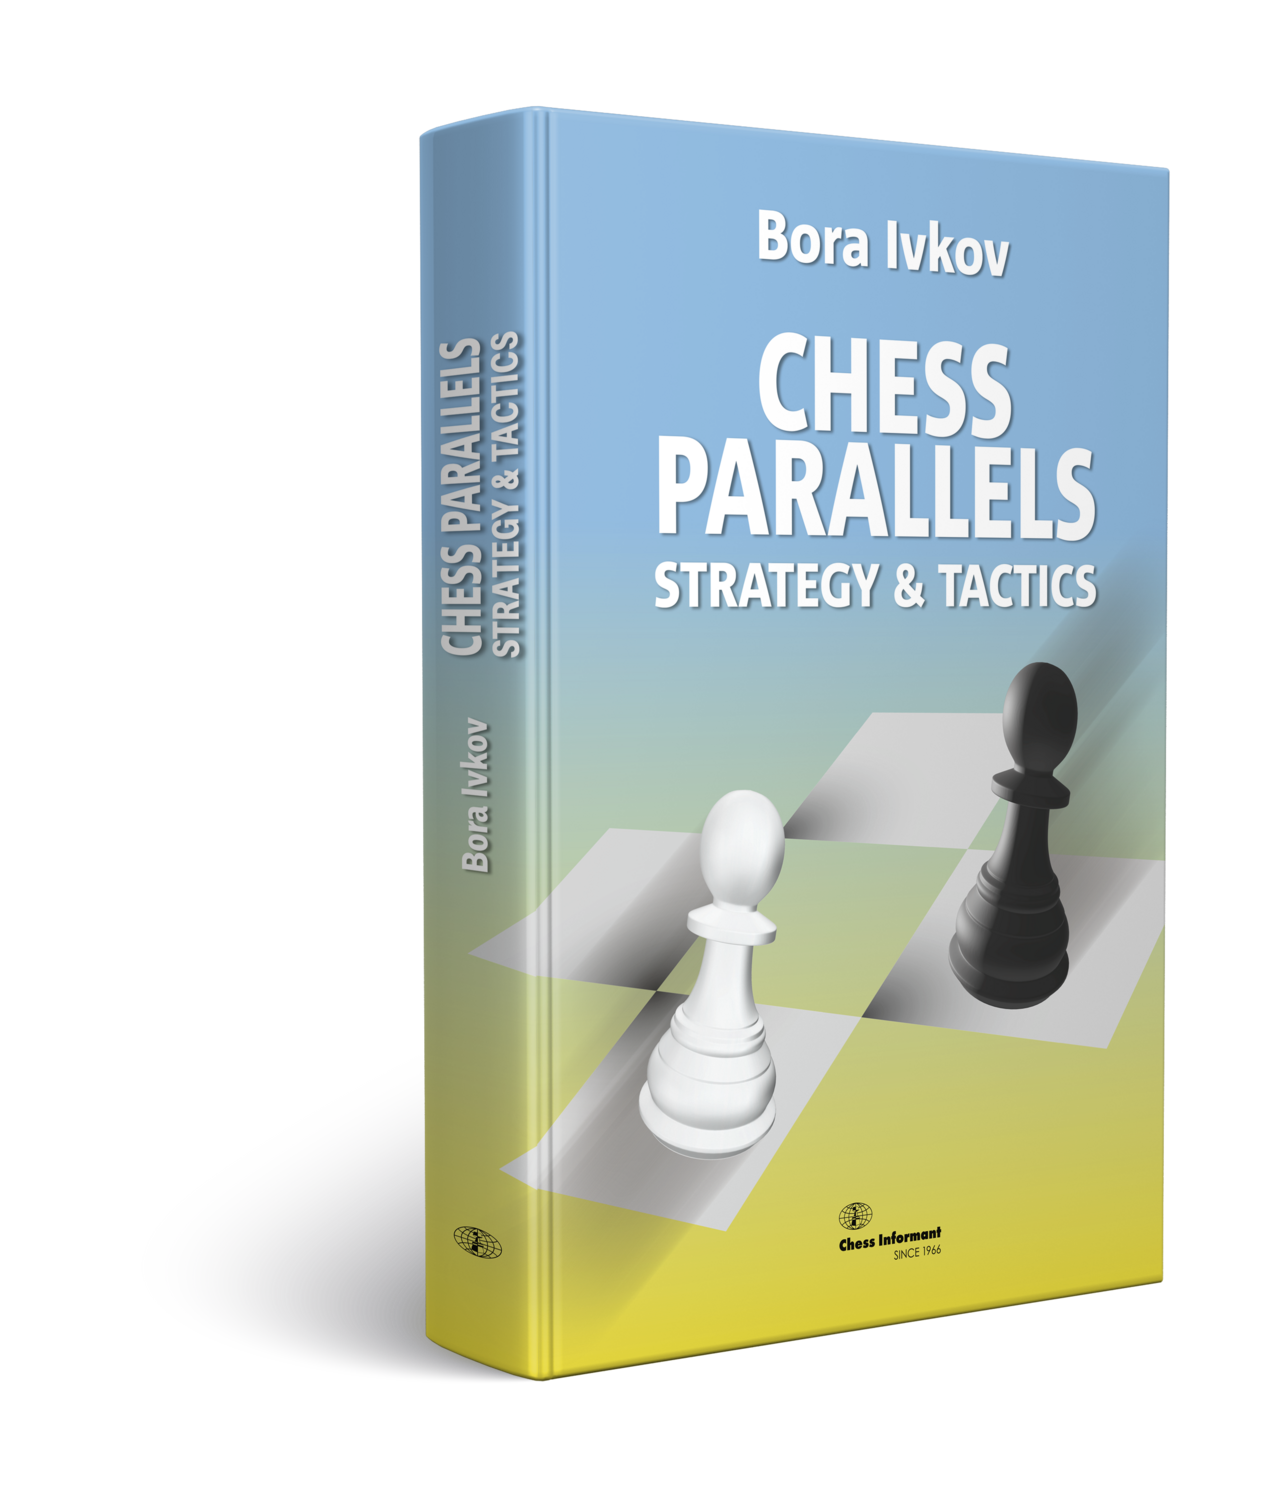 CHESS PARALLELS 1 - Strategy and Tactics by Bora Ivkov